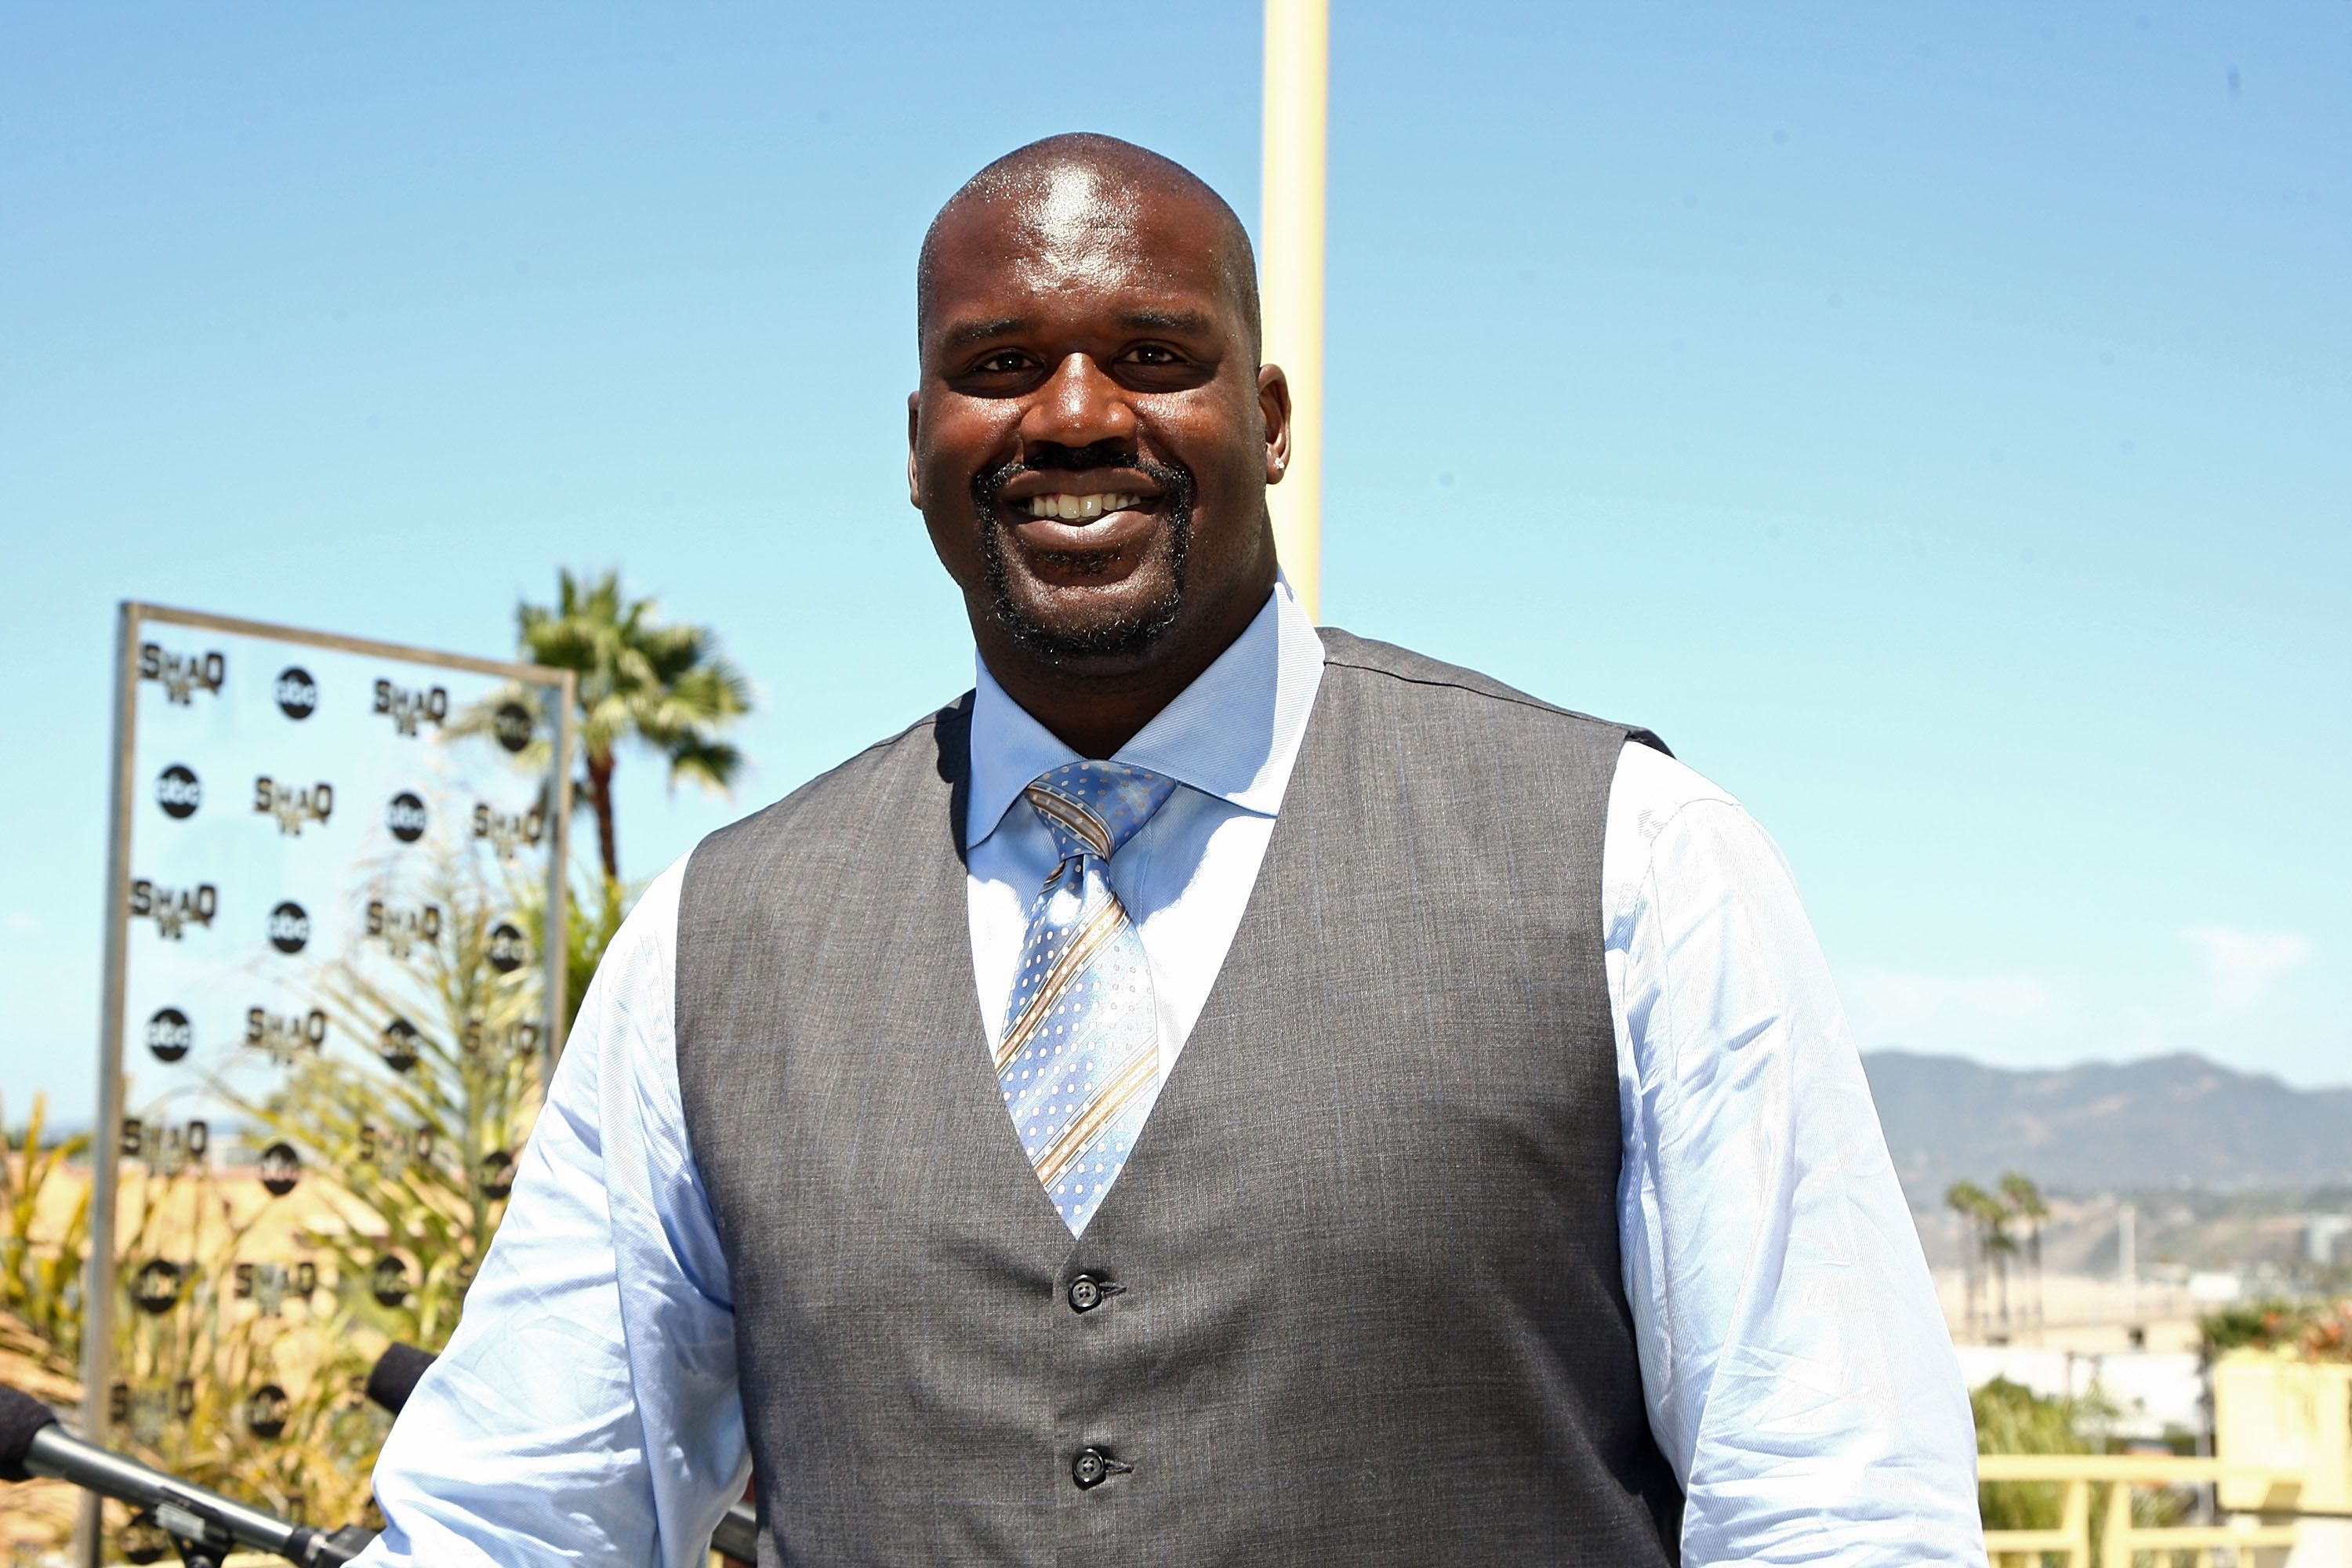 Shaquille O'Neal at a press conference for ABC's new reality show "Shaq Vs." in California.| Photo: Getty Images